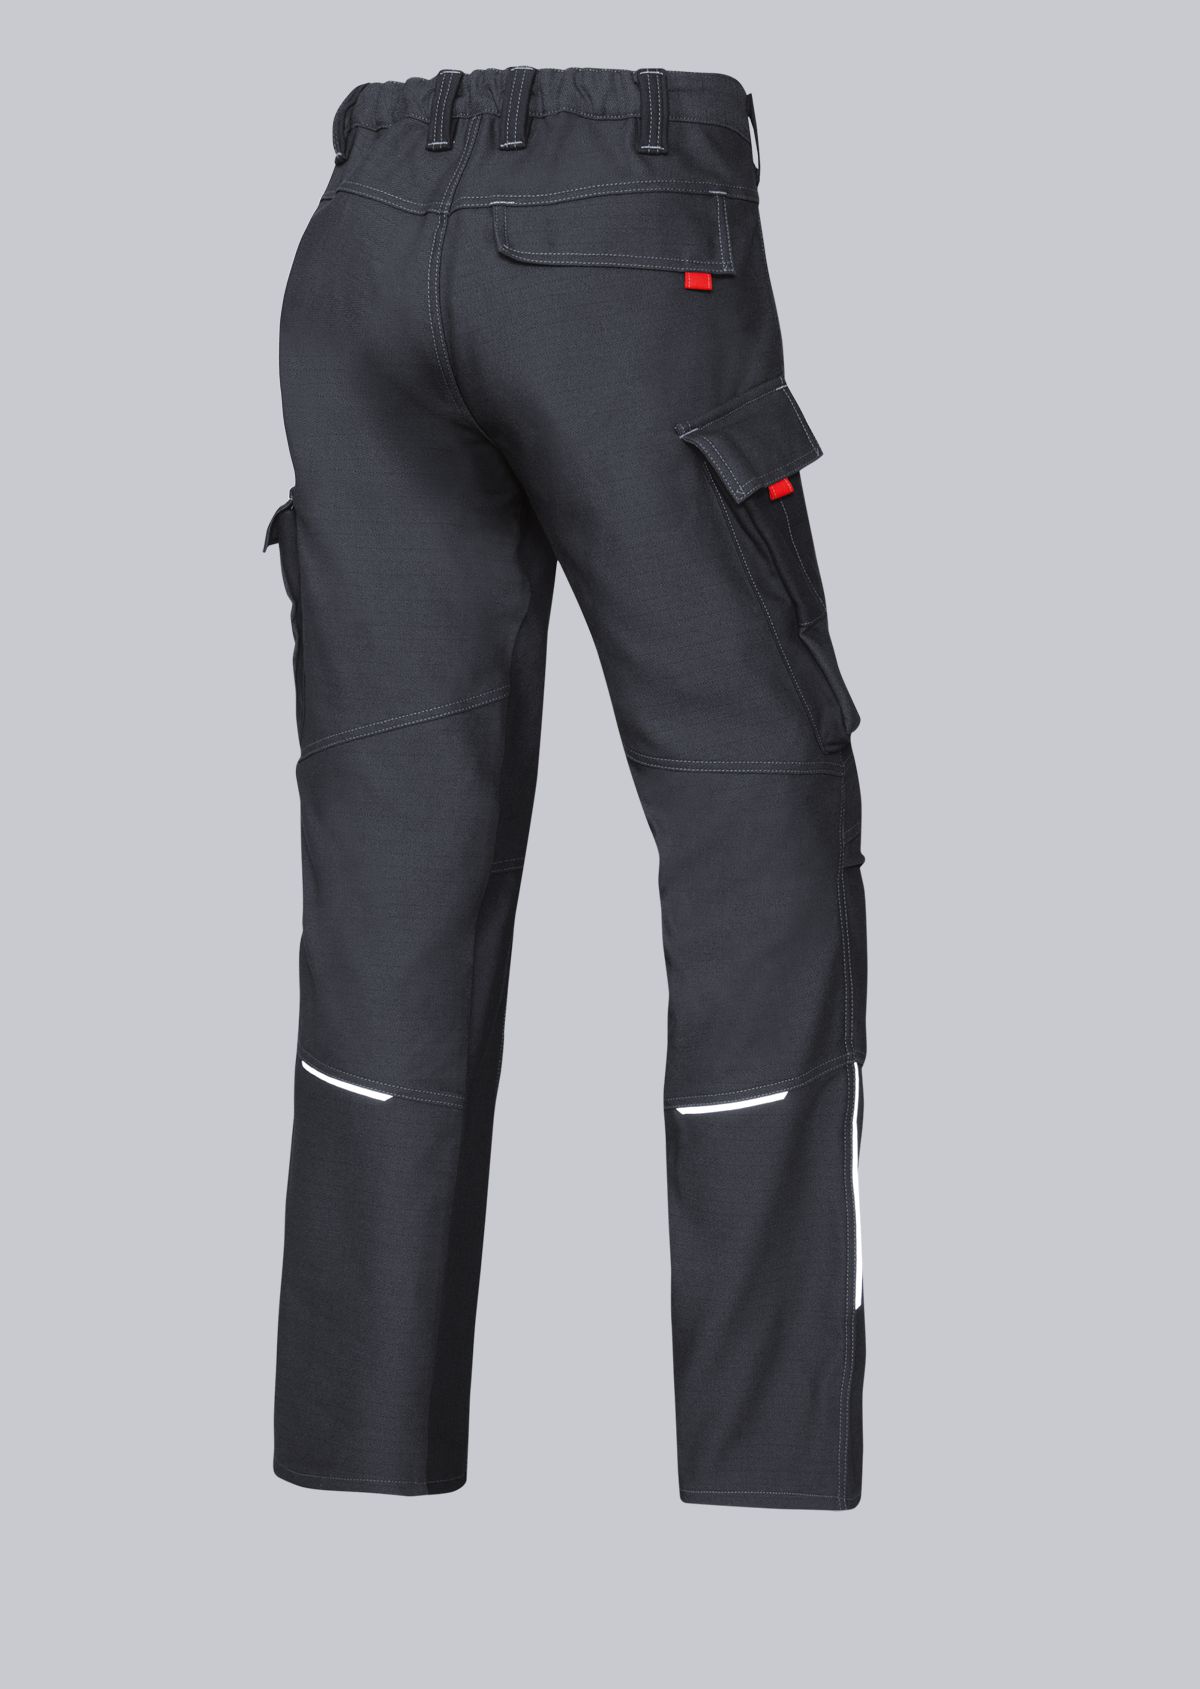 BP® Comfort welder protection trousers with APC1